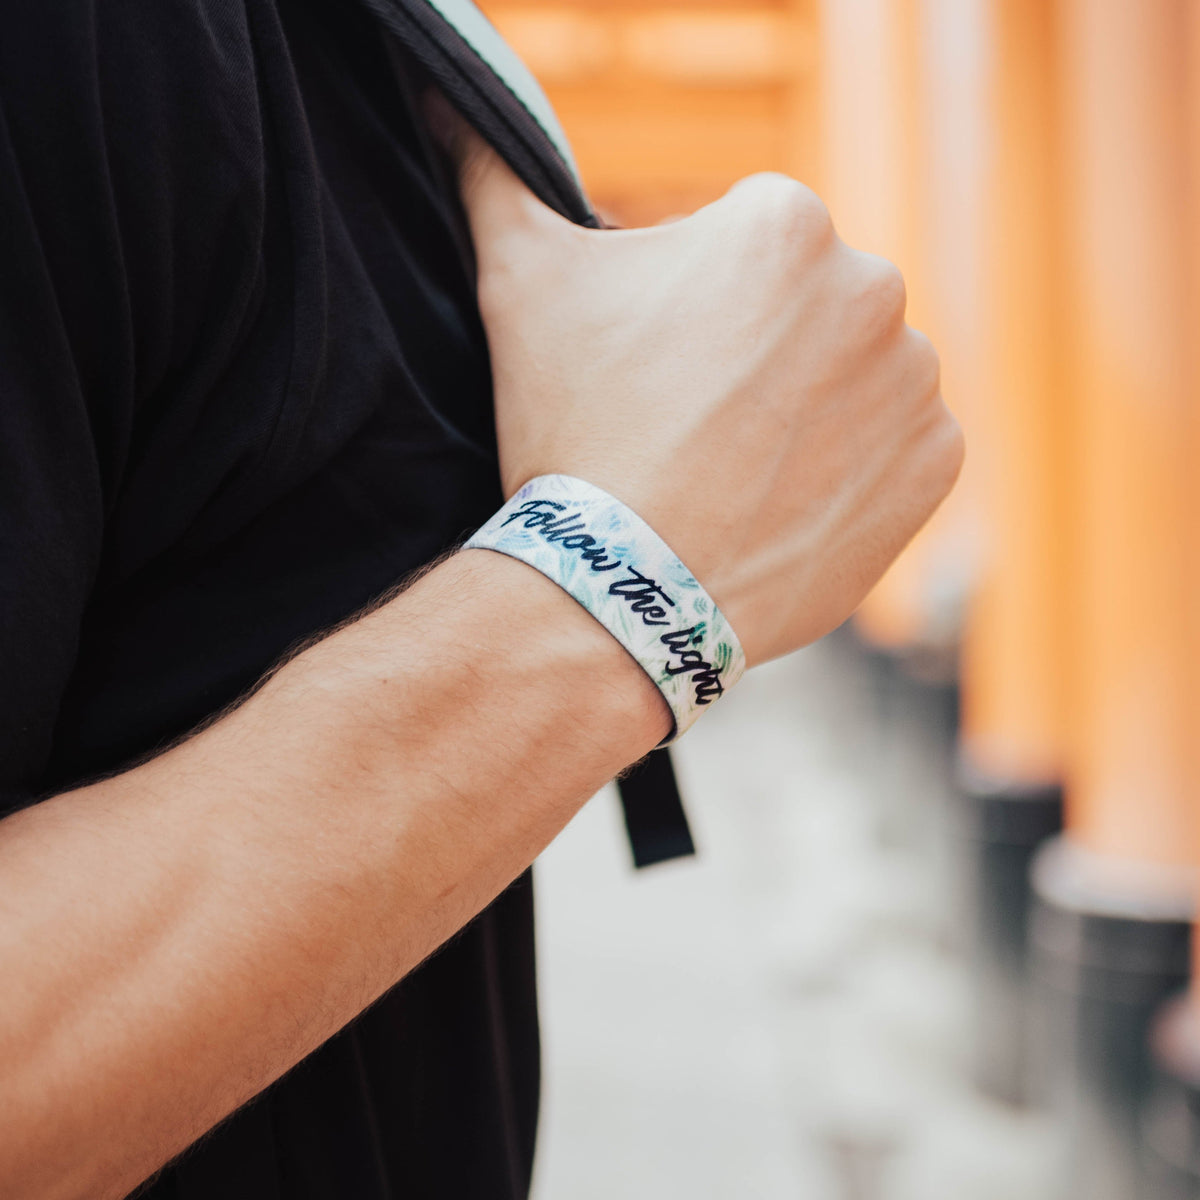 Follow the Light-Sold Out-ZOX - This item is sold out and will not be restocked.